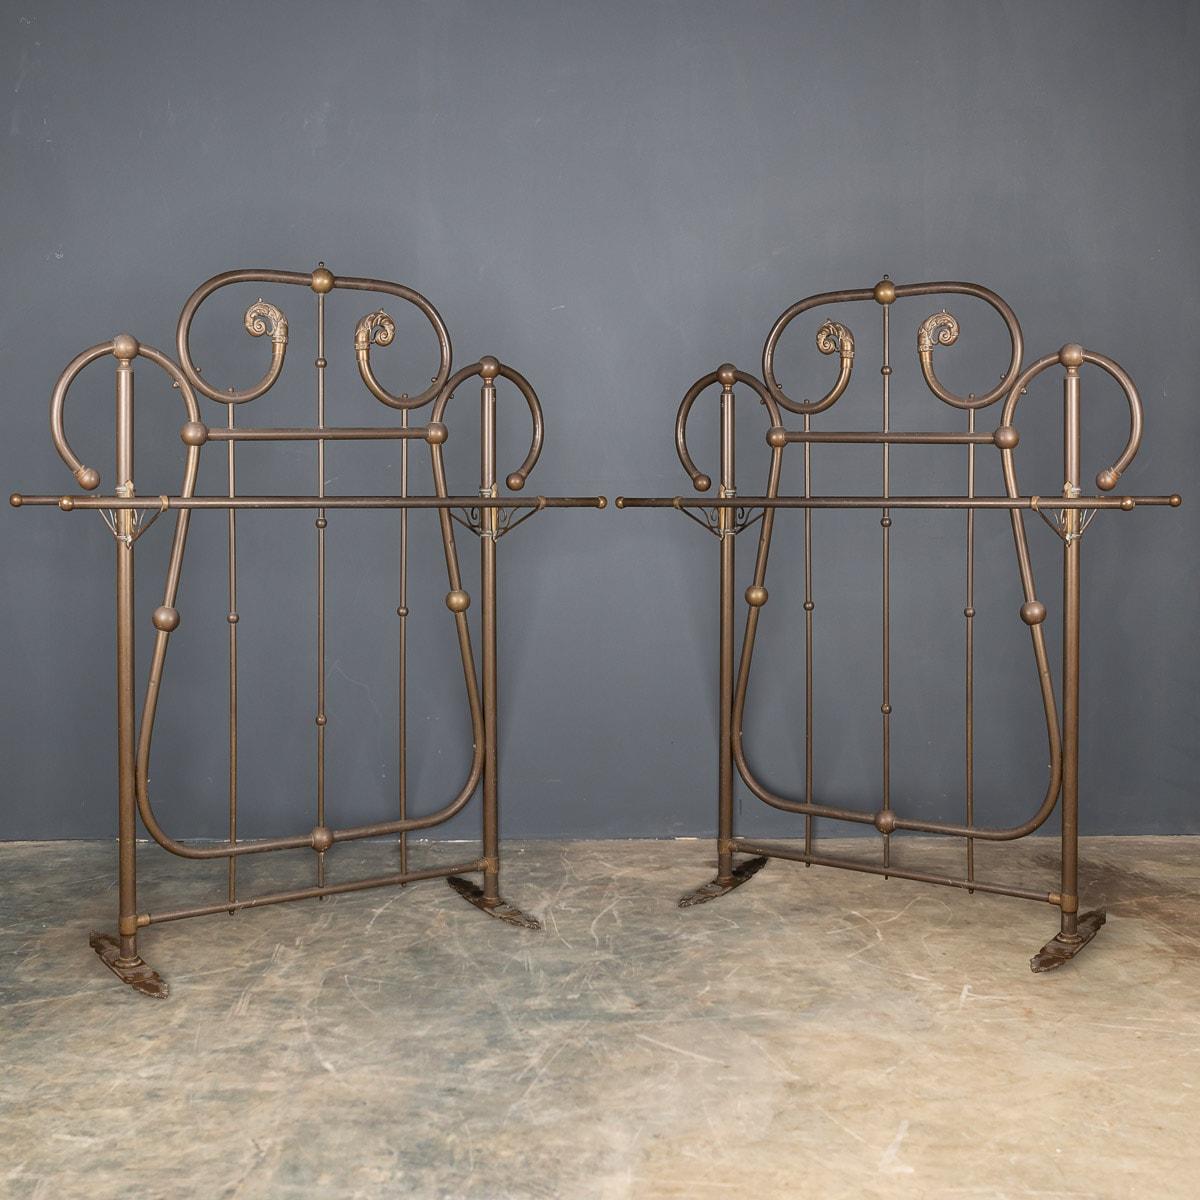 Antique 19th Century pair of huge coat stands from a Victorian hotel. These large brass pieces have rails on both sides and feet that secure to the floor. A fabulous statement piece for a restaurant, club or a large dressing room.

CONDITION
In